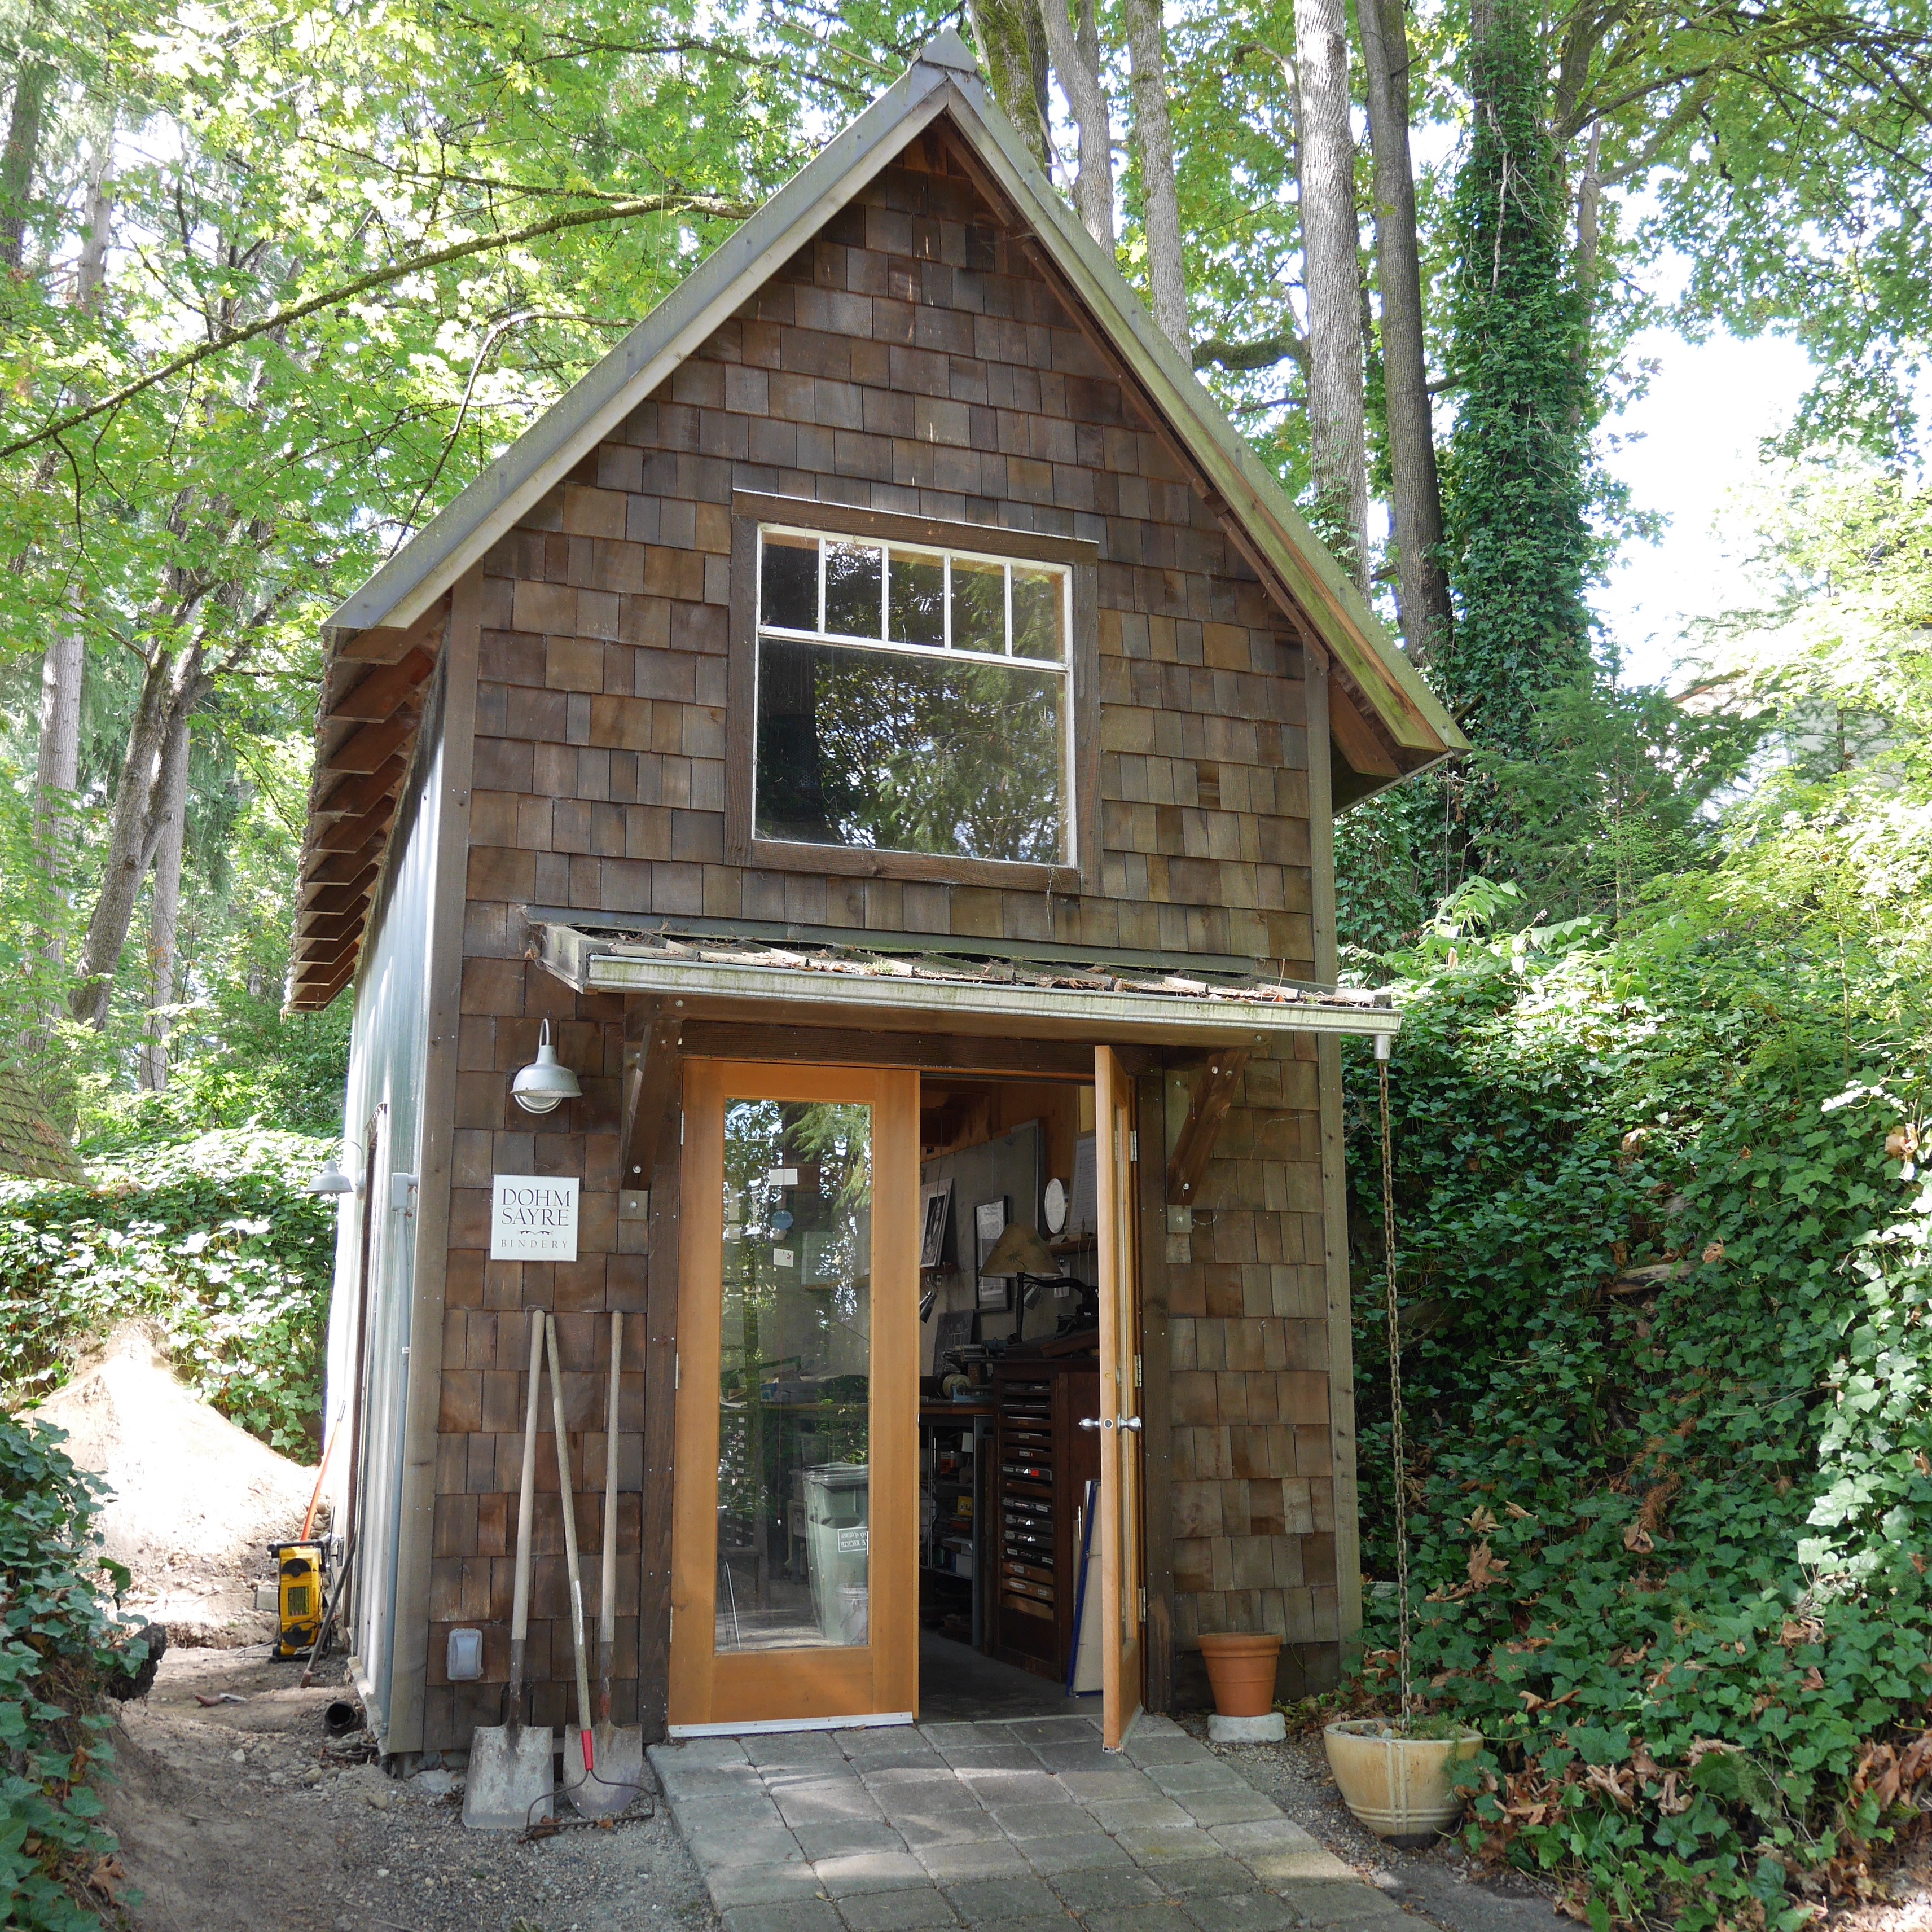 Outside view of the bindery at The Sherwood Press